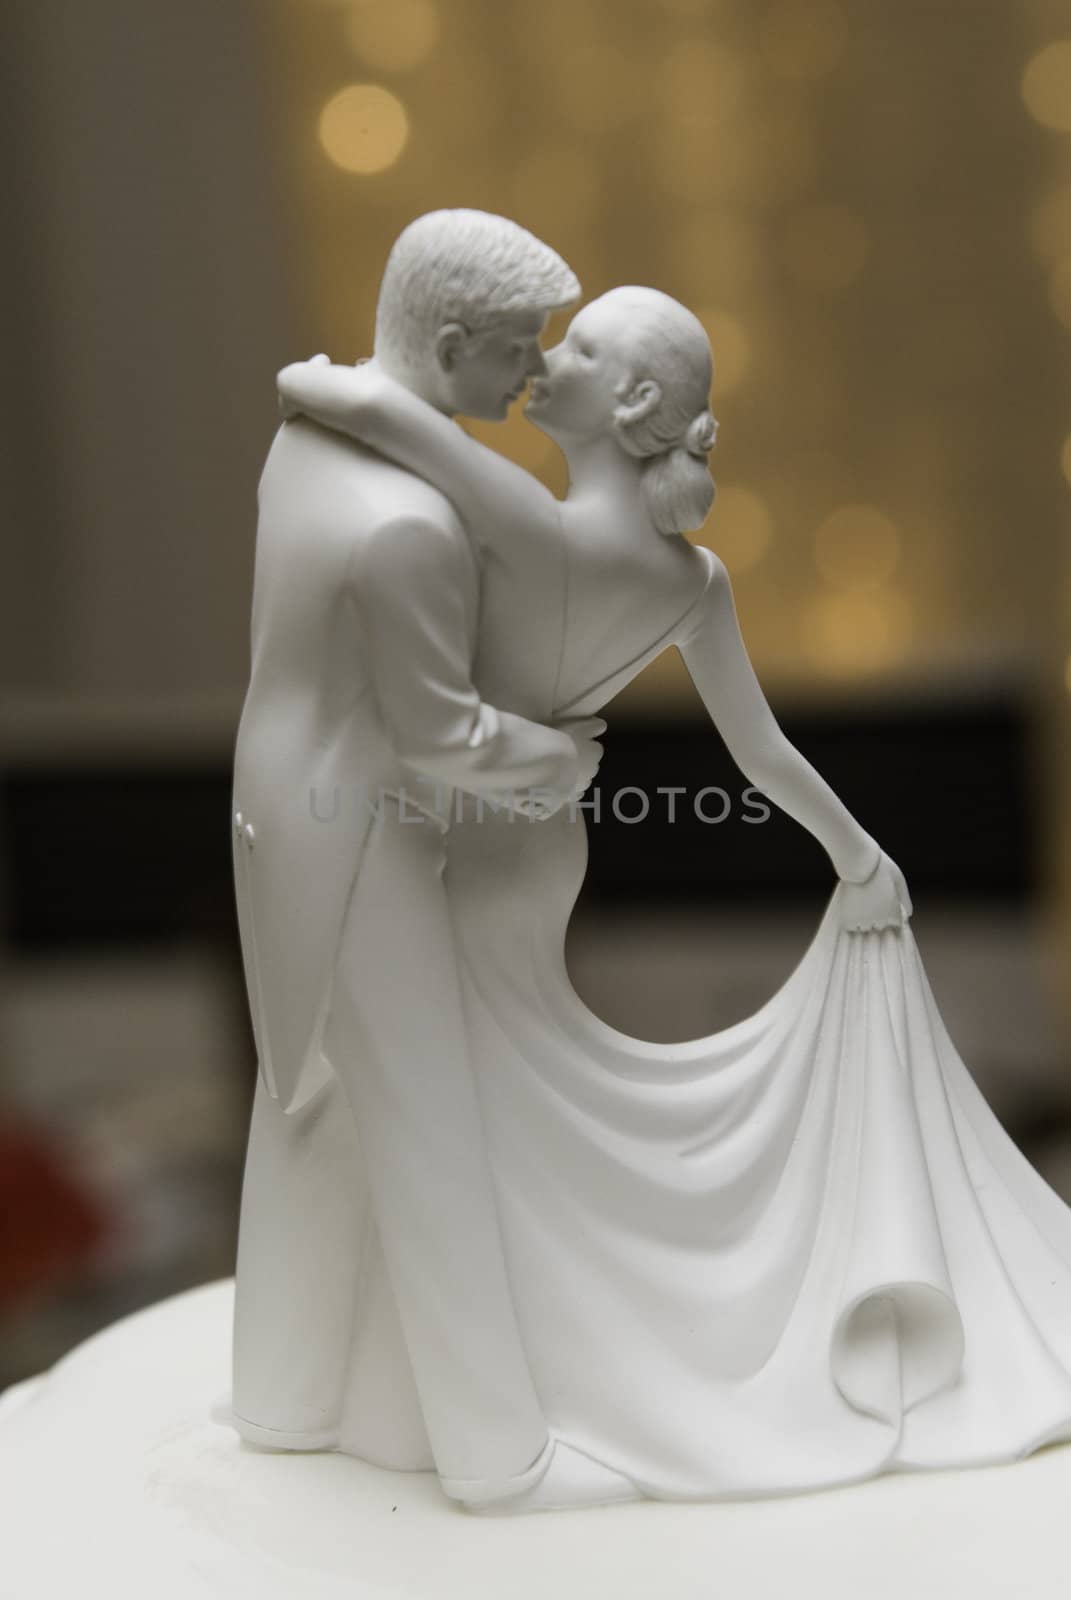 Figures on a wedding cake by Ansunette